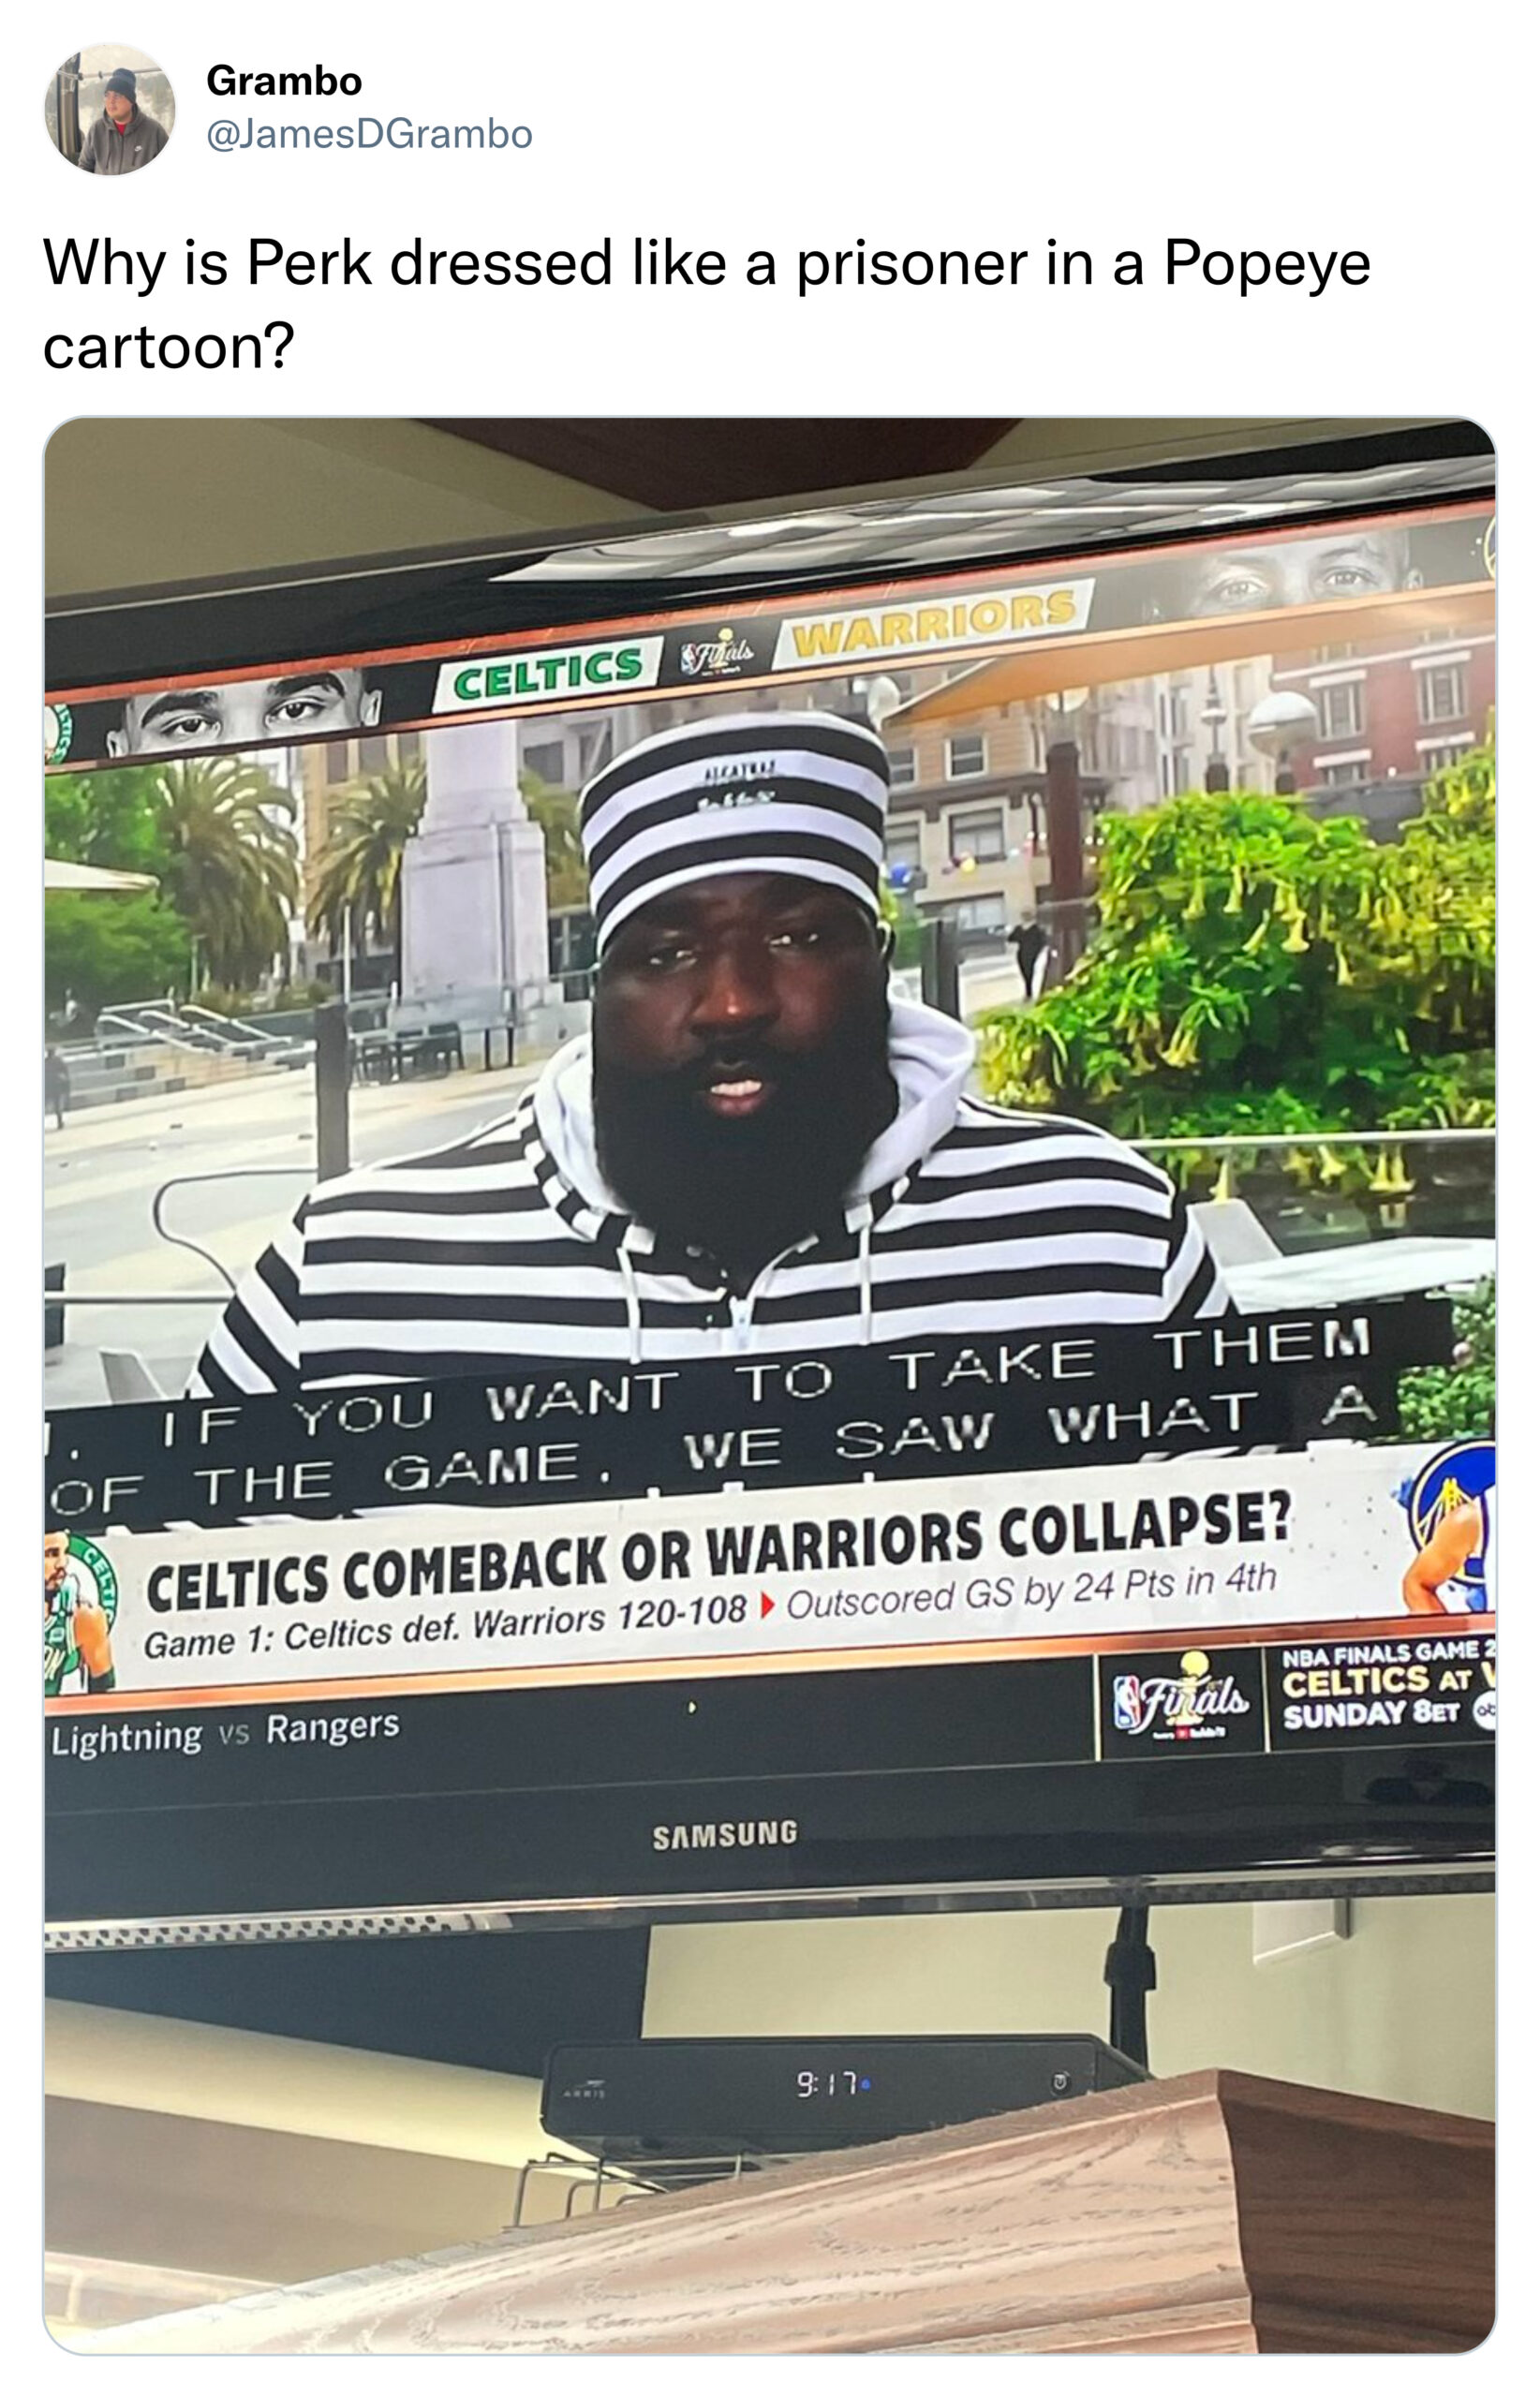 display advertising - Grambo Why is Perk dressed a prisoner in a Popeye cartoon? Celtics Warri Adal You Want Them To Take A Of The Game, We Saw What Celtics Comeback Or Warriors Collapse? Game 1 Celtics det. Warriors 120100 Outscored Gs by 24 Pts in 4th L